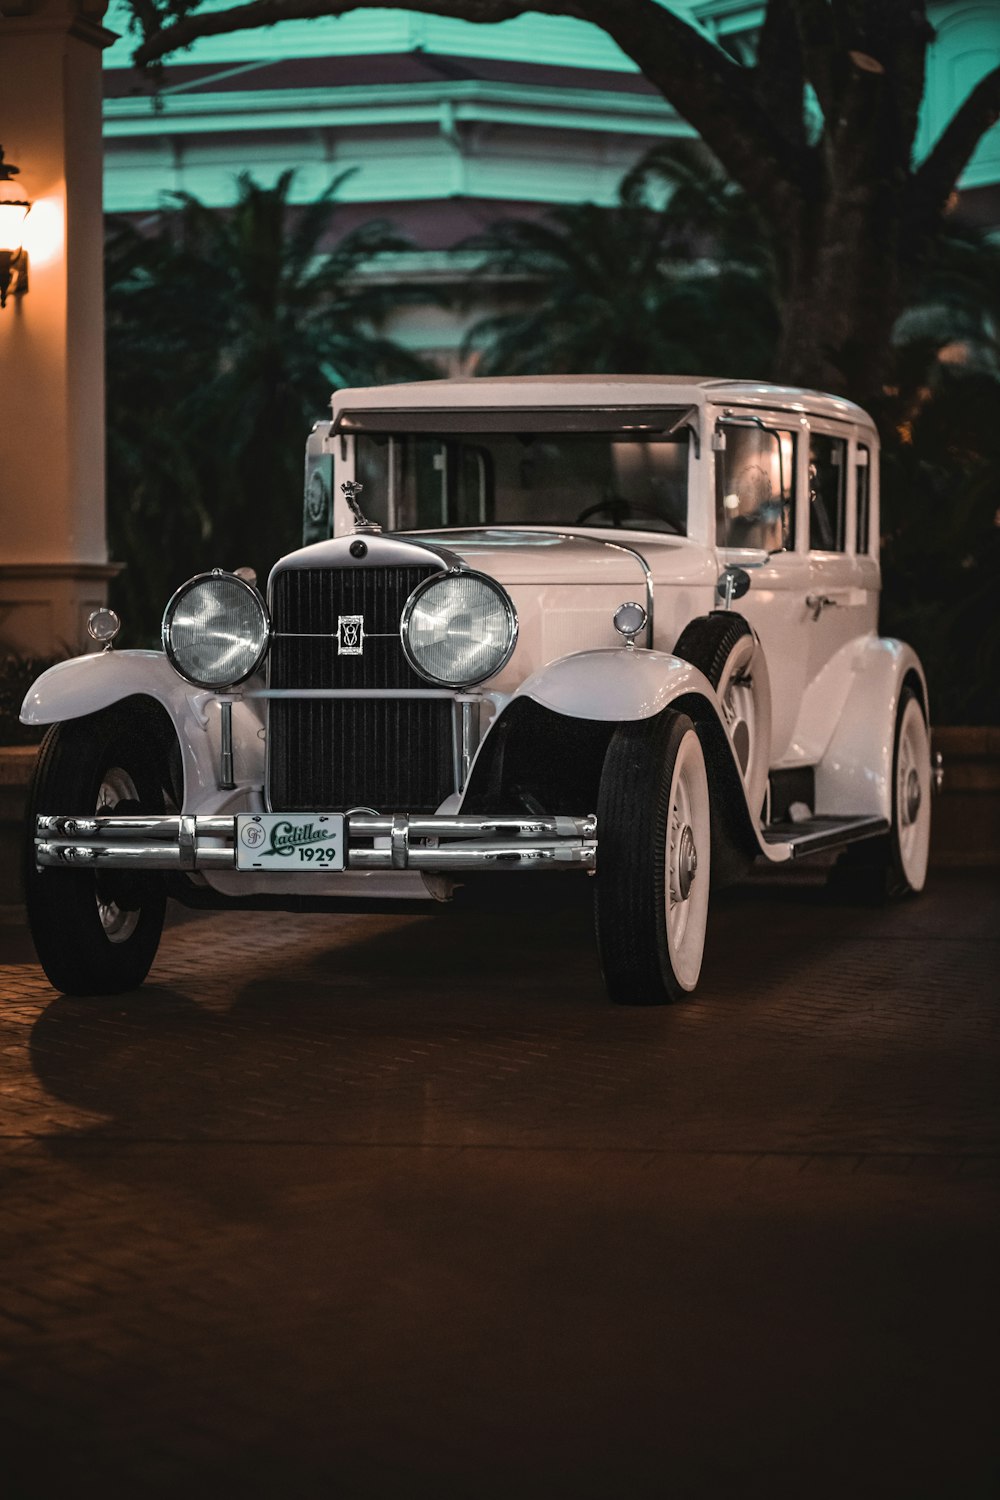 an old white car parked in front of a building